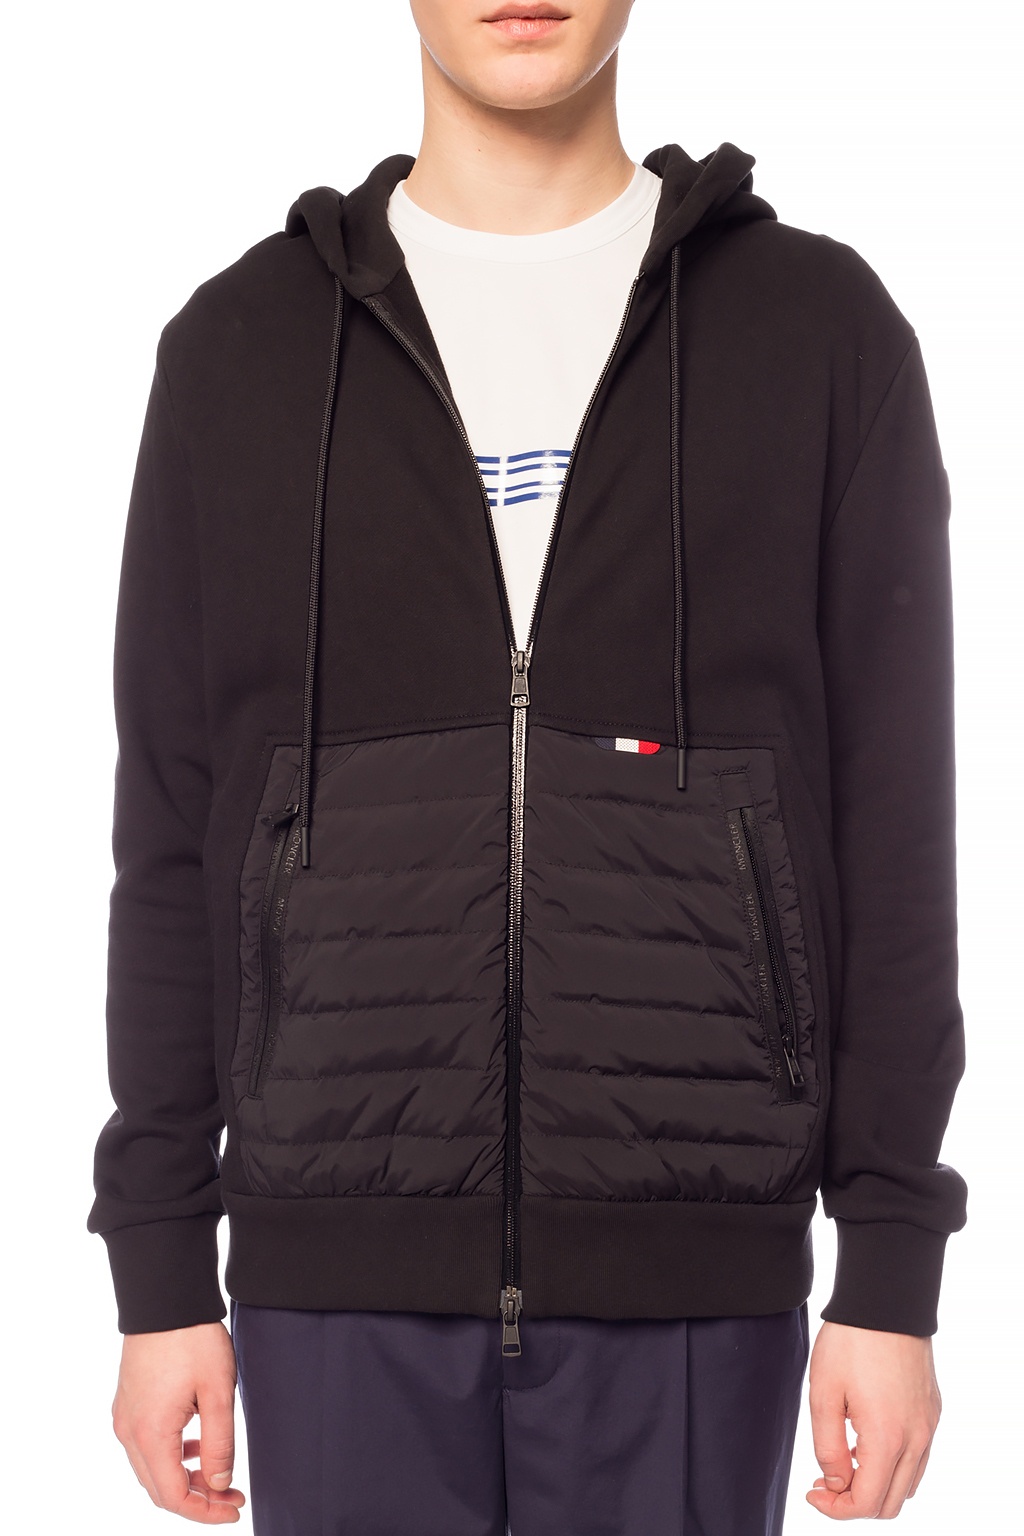 Sweatshirt with quilted pockets Moncler - Vitkac Singapore